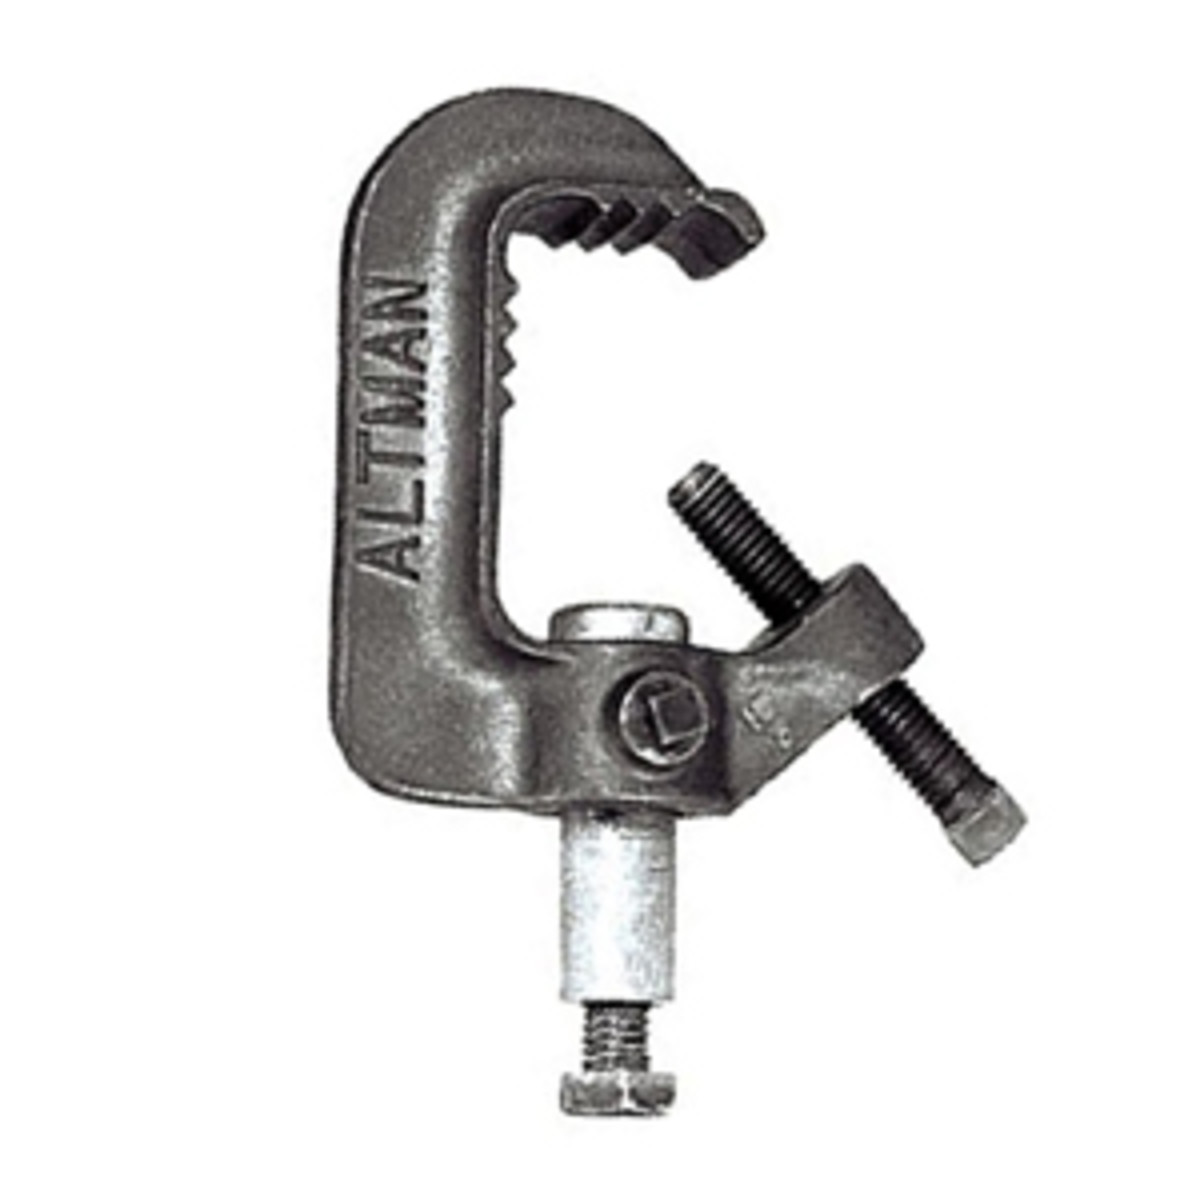 IMAGE 2:  C-Clamp.  "Fuck Nut" is facing you.